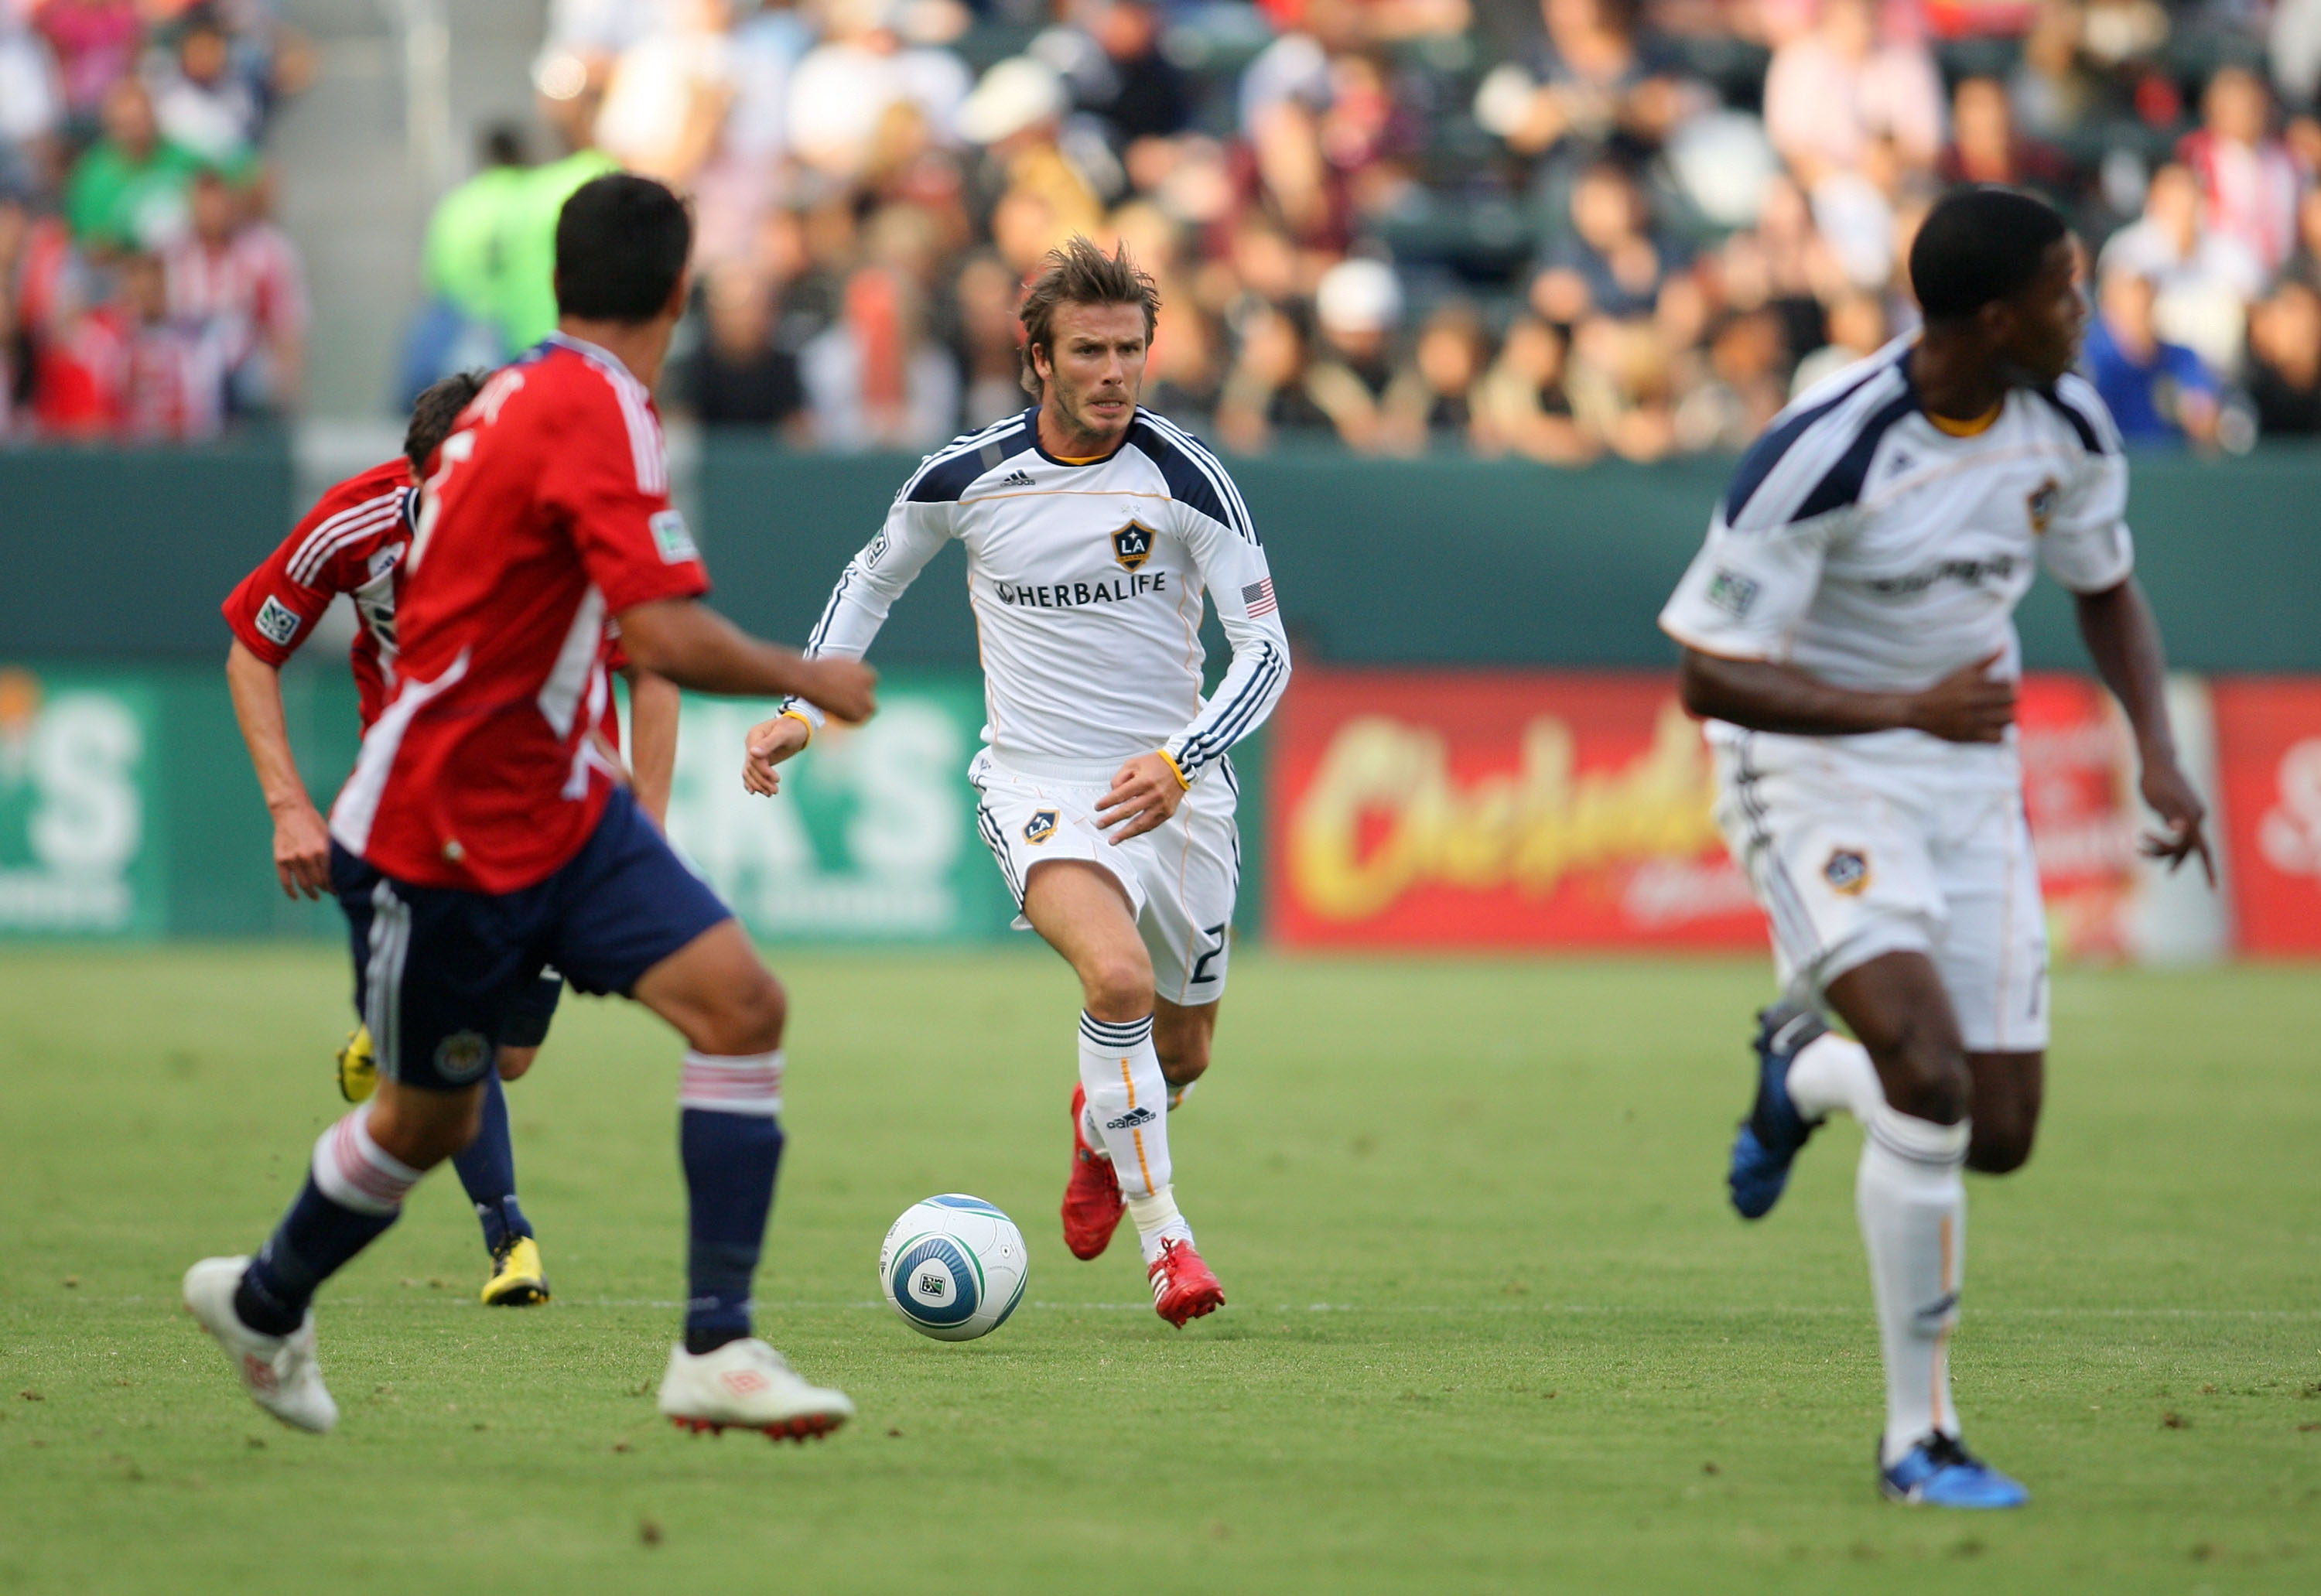 CARSON, CA - OCTOBER 03:  David Beckham #23 of the Los Angeles Galaxy plays the ball through midfield on the counterattack against Chivas USA during the MLS match at The Home Depot Center on October 3, 2010 in Carson, California. The Galaxy defeated Chiva